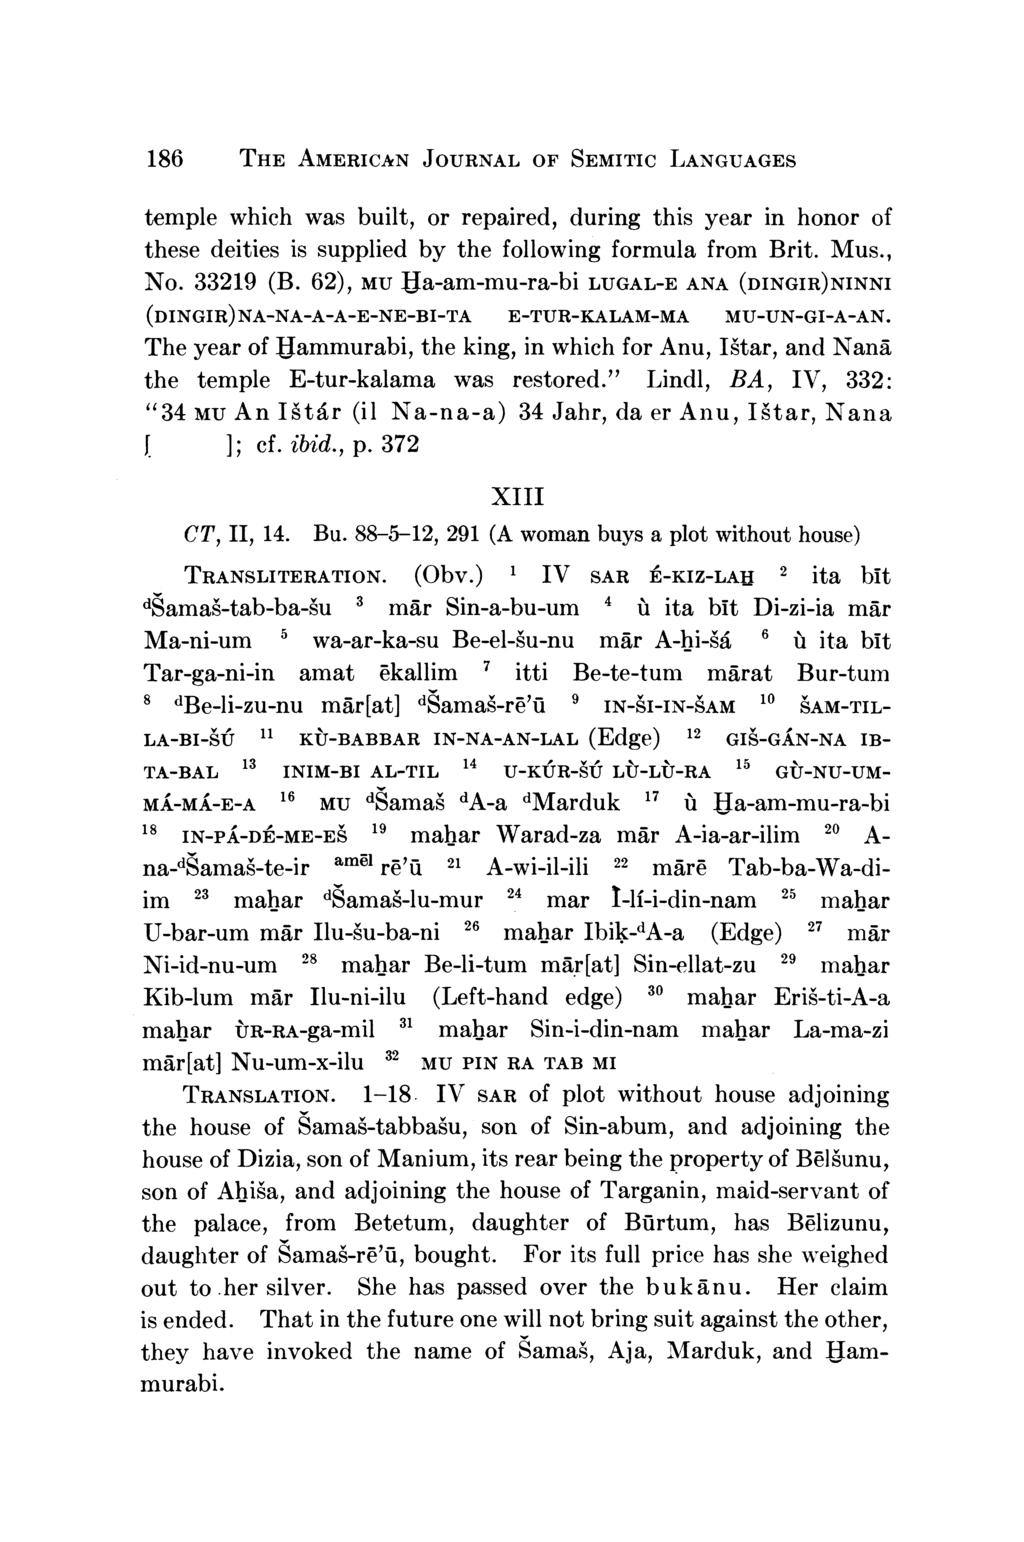 186 THE AMERICAN JOURNAL OF SEMITIC LANGUAGES temple which was built, or repaired, during this year in honor of these deities is supplied by the following formula from Brit. Mus., No. 33219 (B.